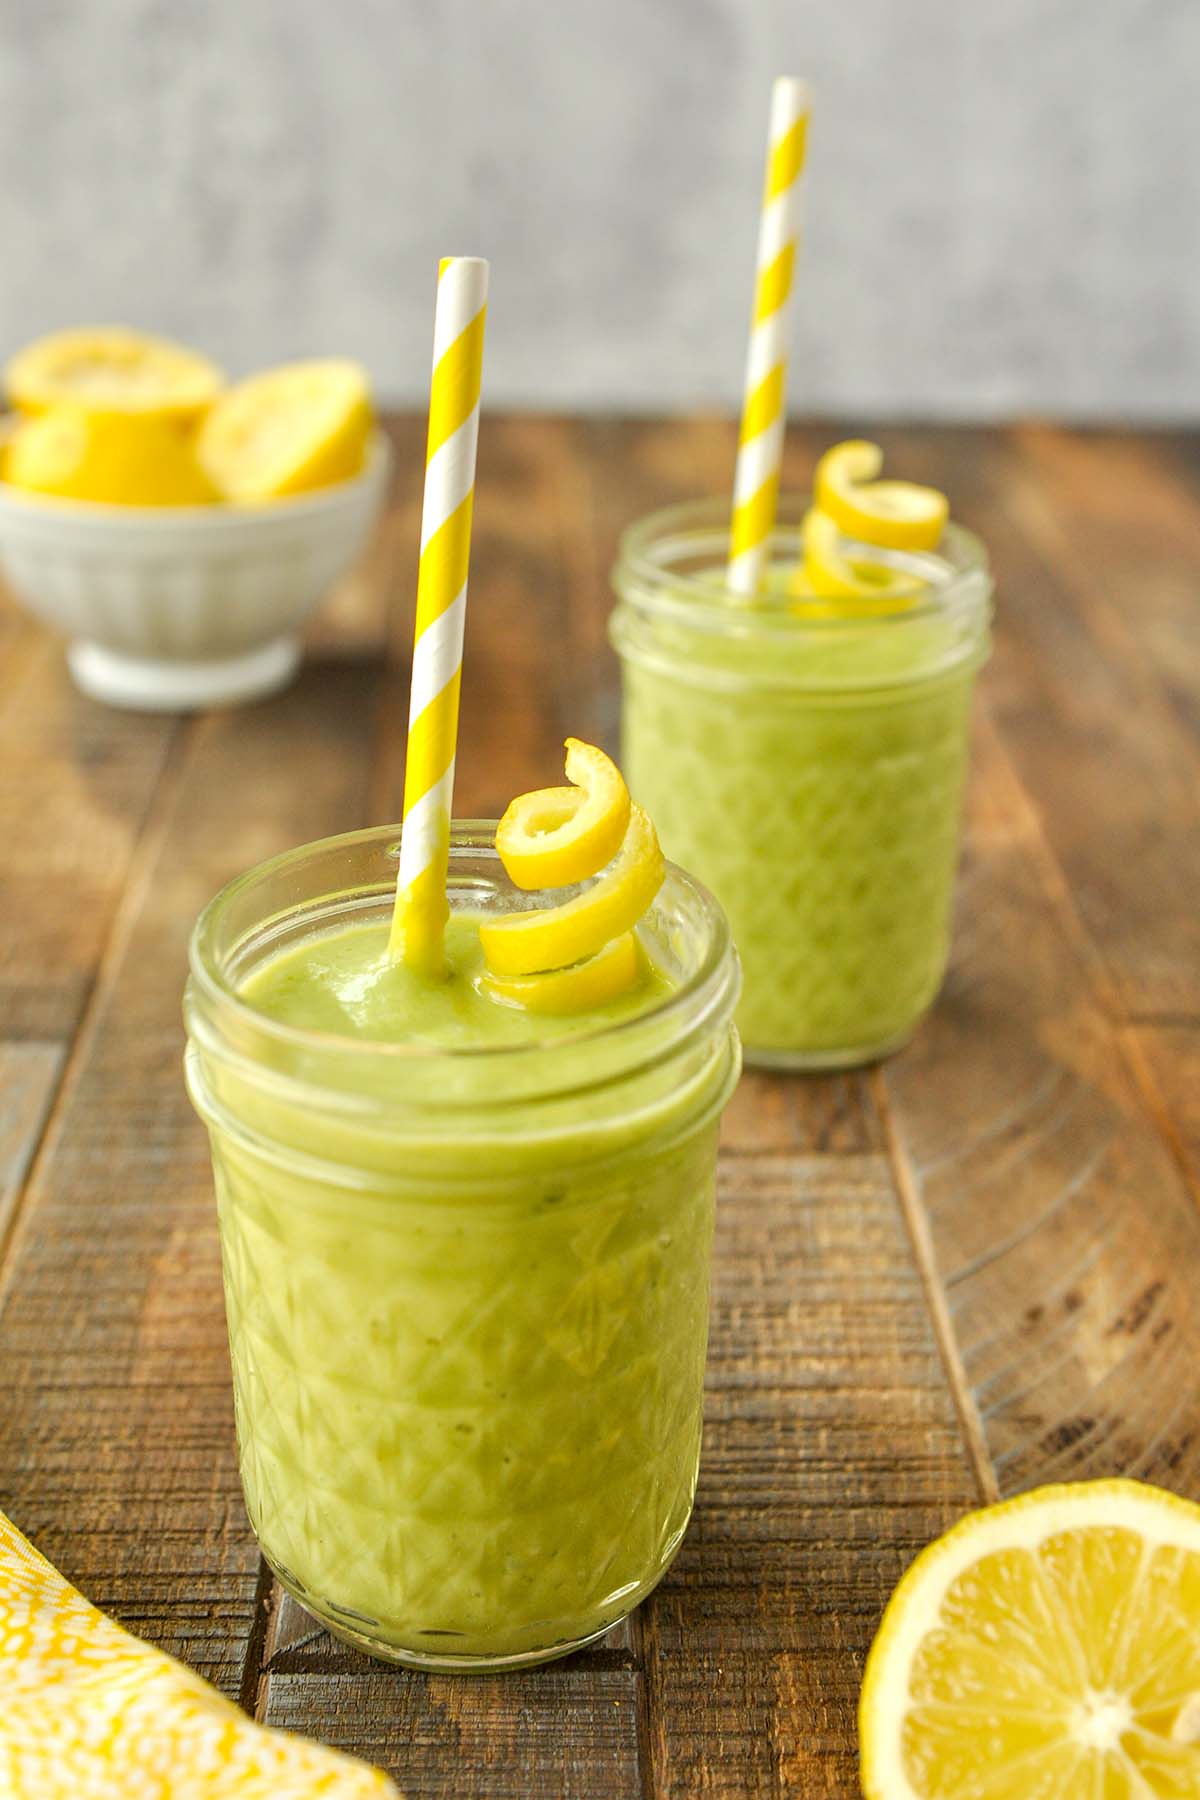 Two cups of lemon green smoothie with a twist of lemon peel and a yellow and white striped straw.